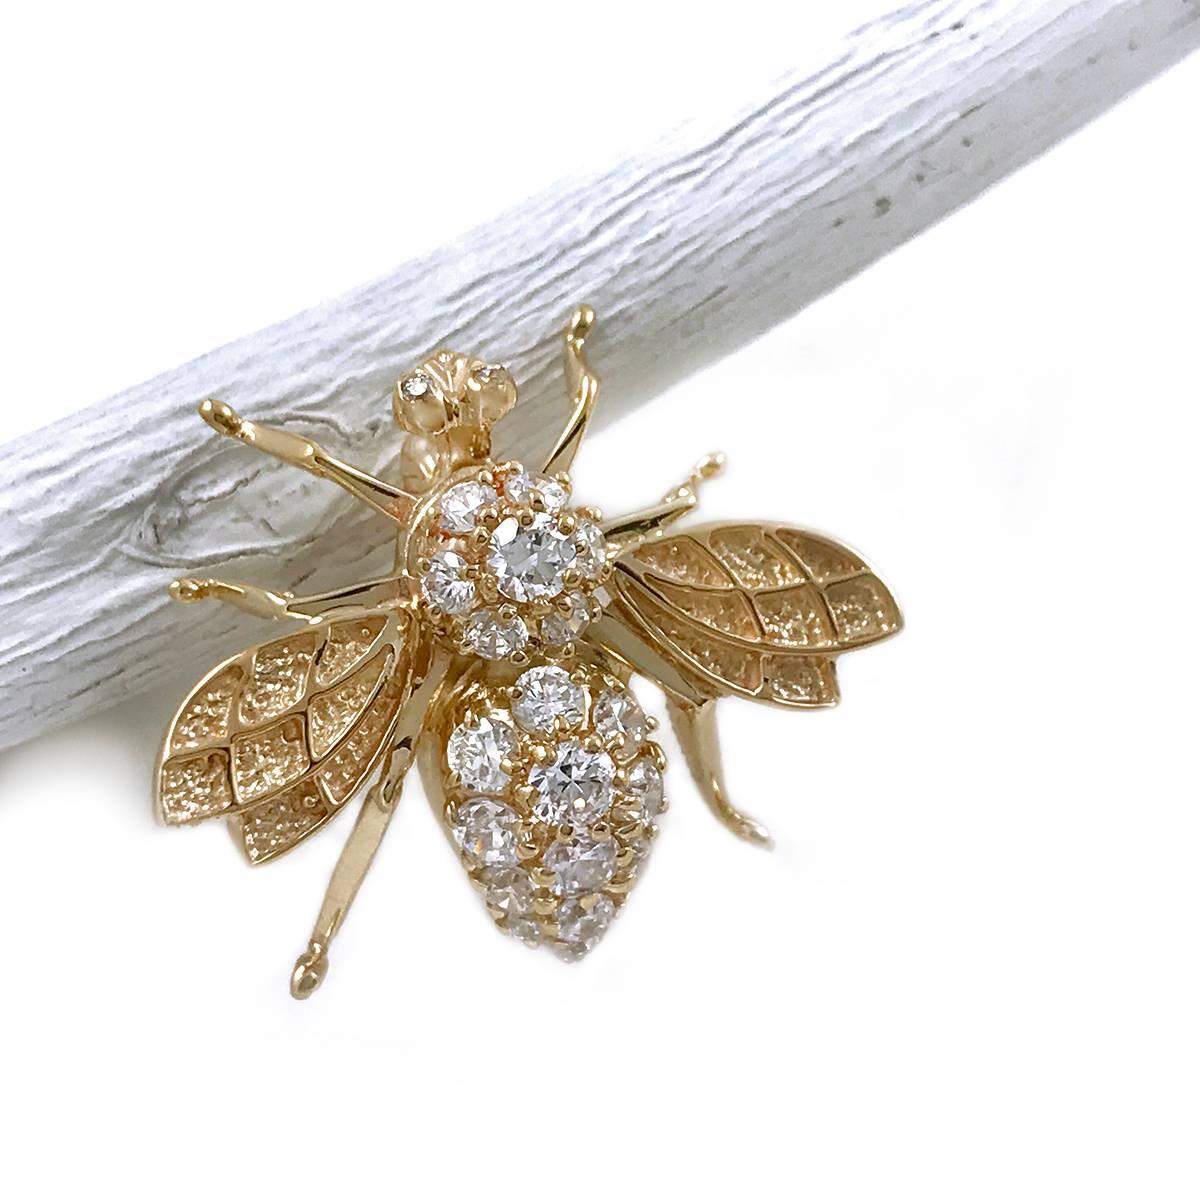 Vintage 14k Yellow Gold Honey Bee Brooch/Pin with Cubic Zirconia Eyes and Body. A super sweet little bug that will add sparkle to any outfit. Lovely details in the wings with round Cubic Zirconia stones in the eyes and body, stones are three prong